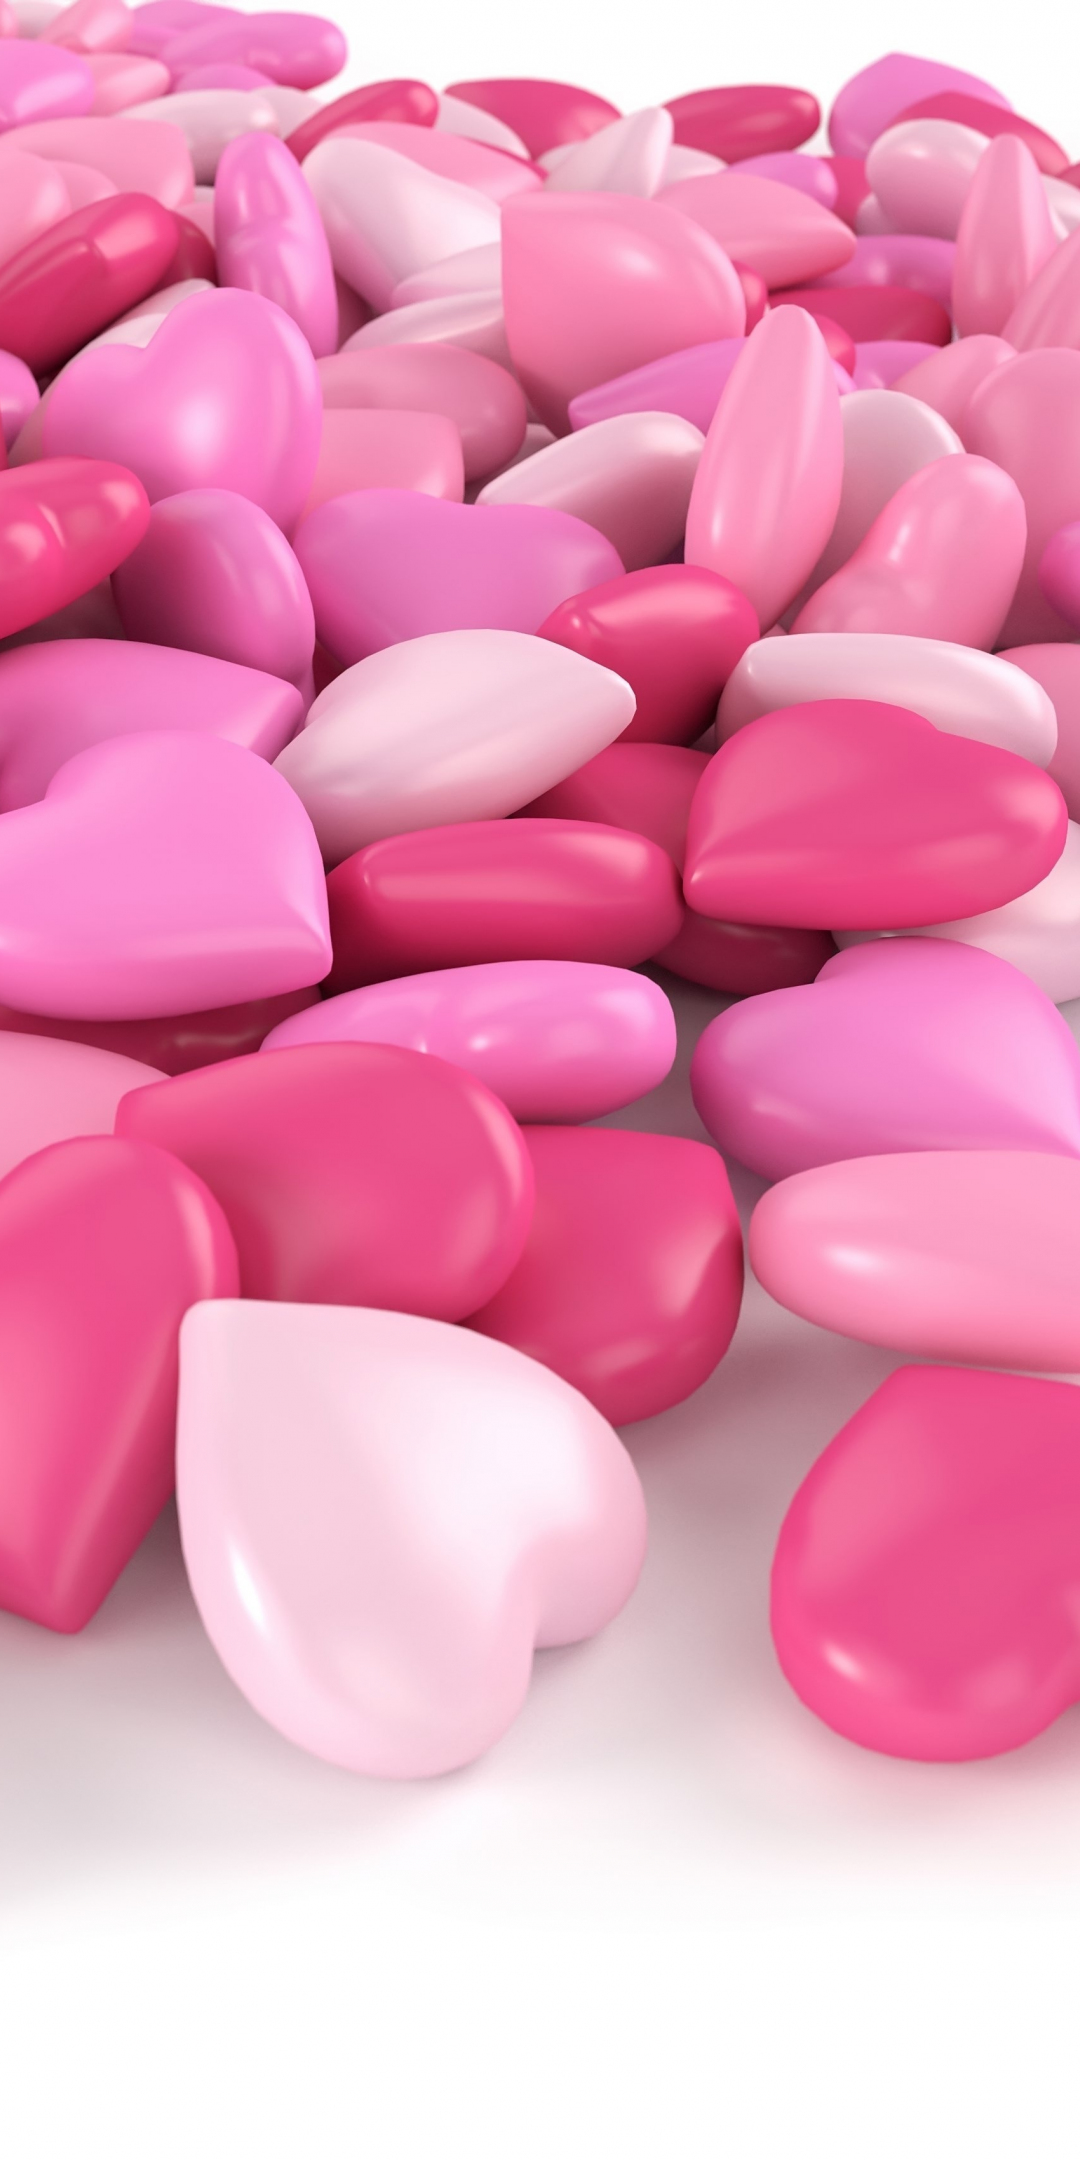 Hearts, sweets, candy, 1080x2160 wallpaper